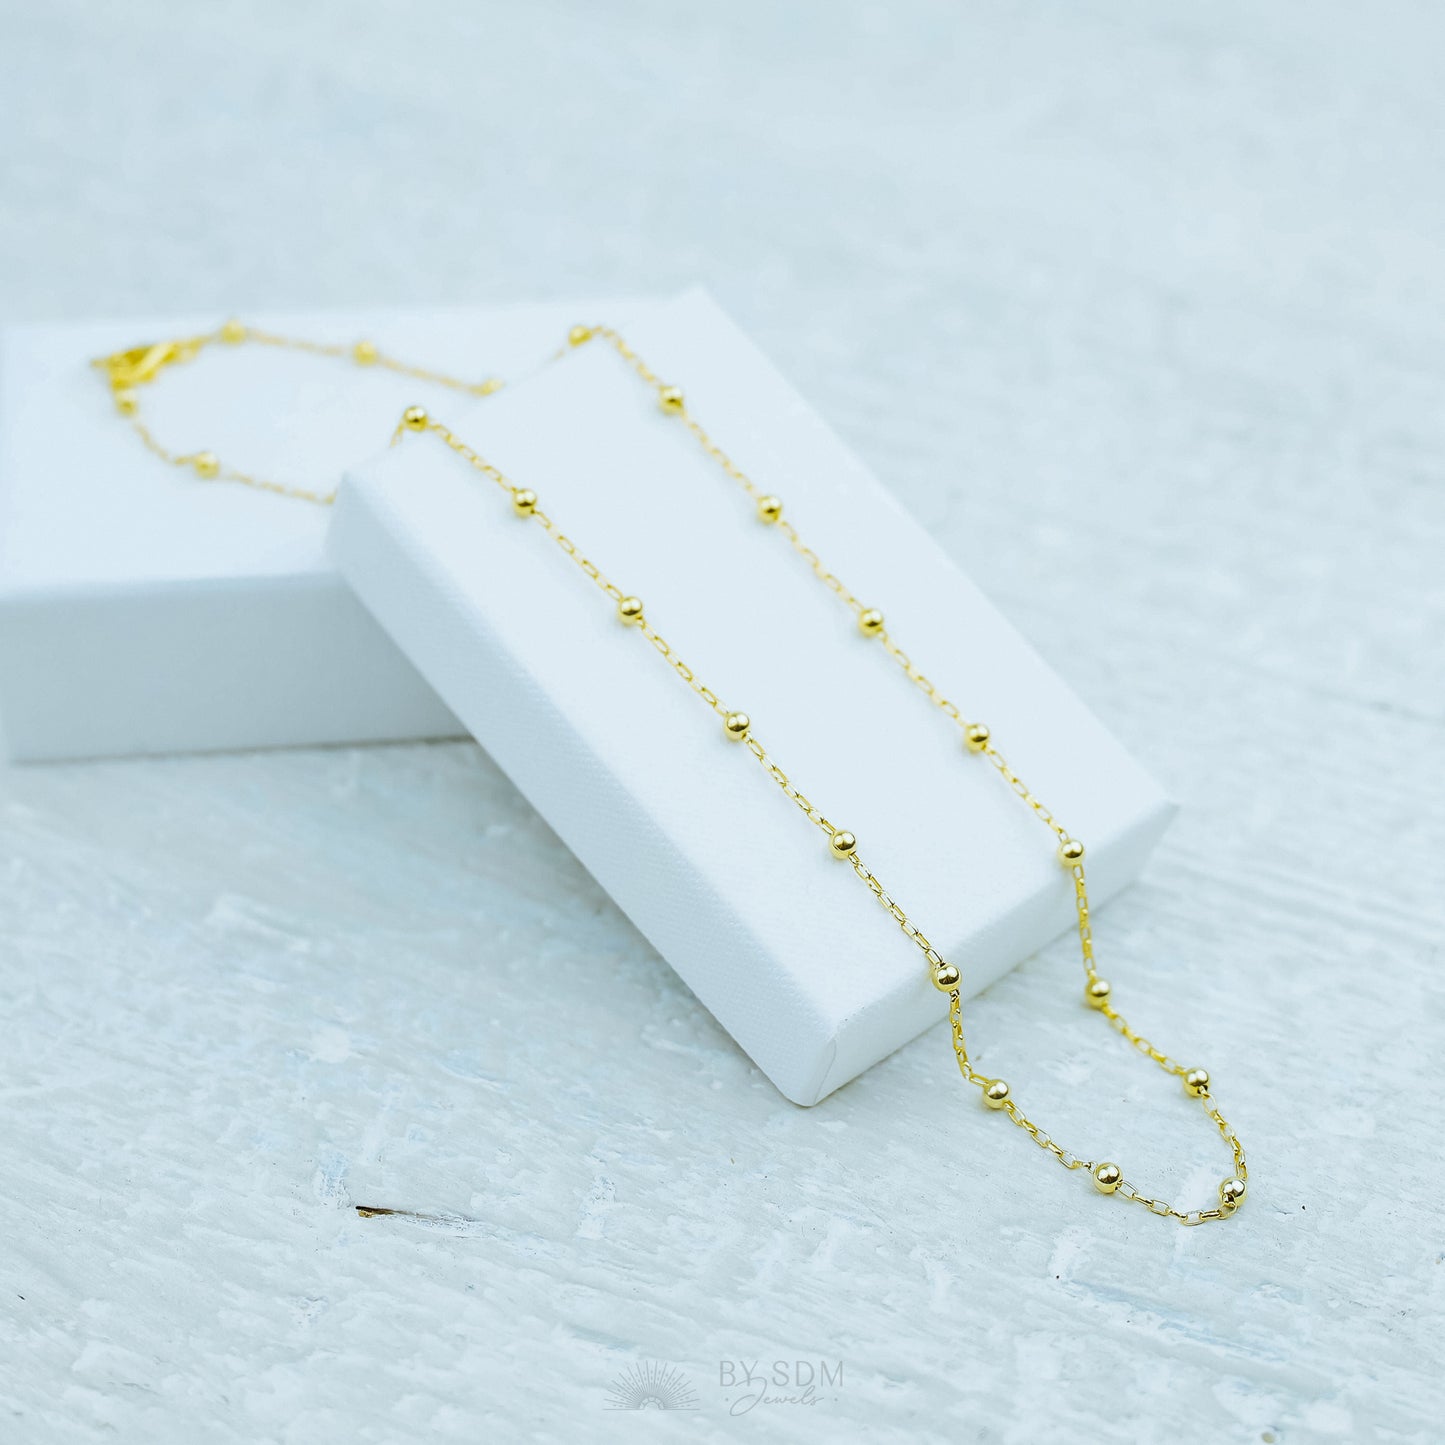 Sterling Choker Necklace • Dainty Satellite Necklace Chain • Silver Choker • Layering Necklace • Gift for Her • Tiny Satellite Chain